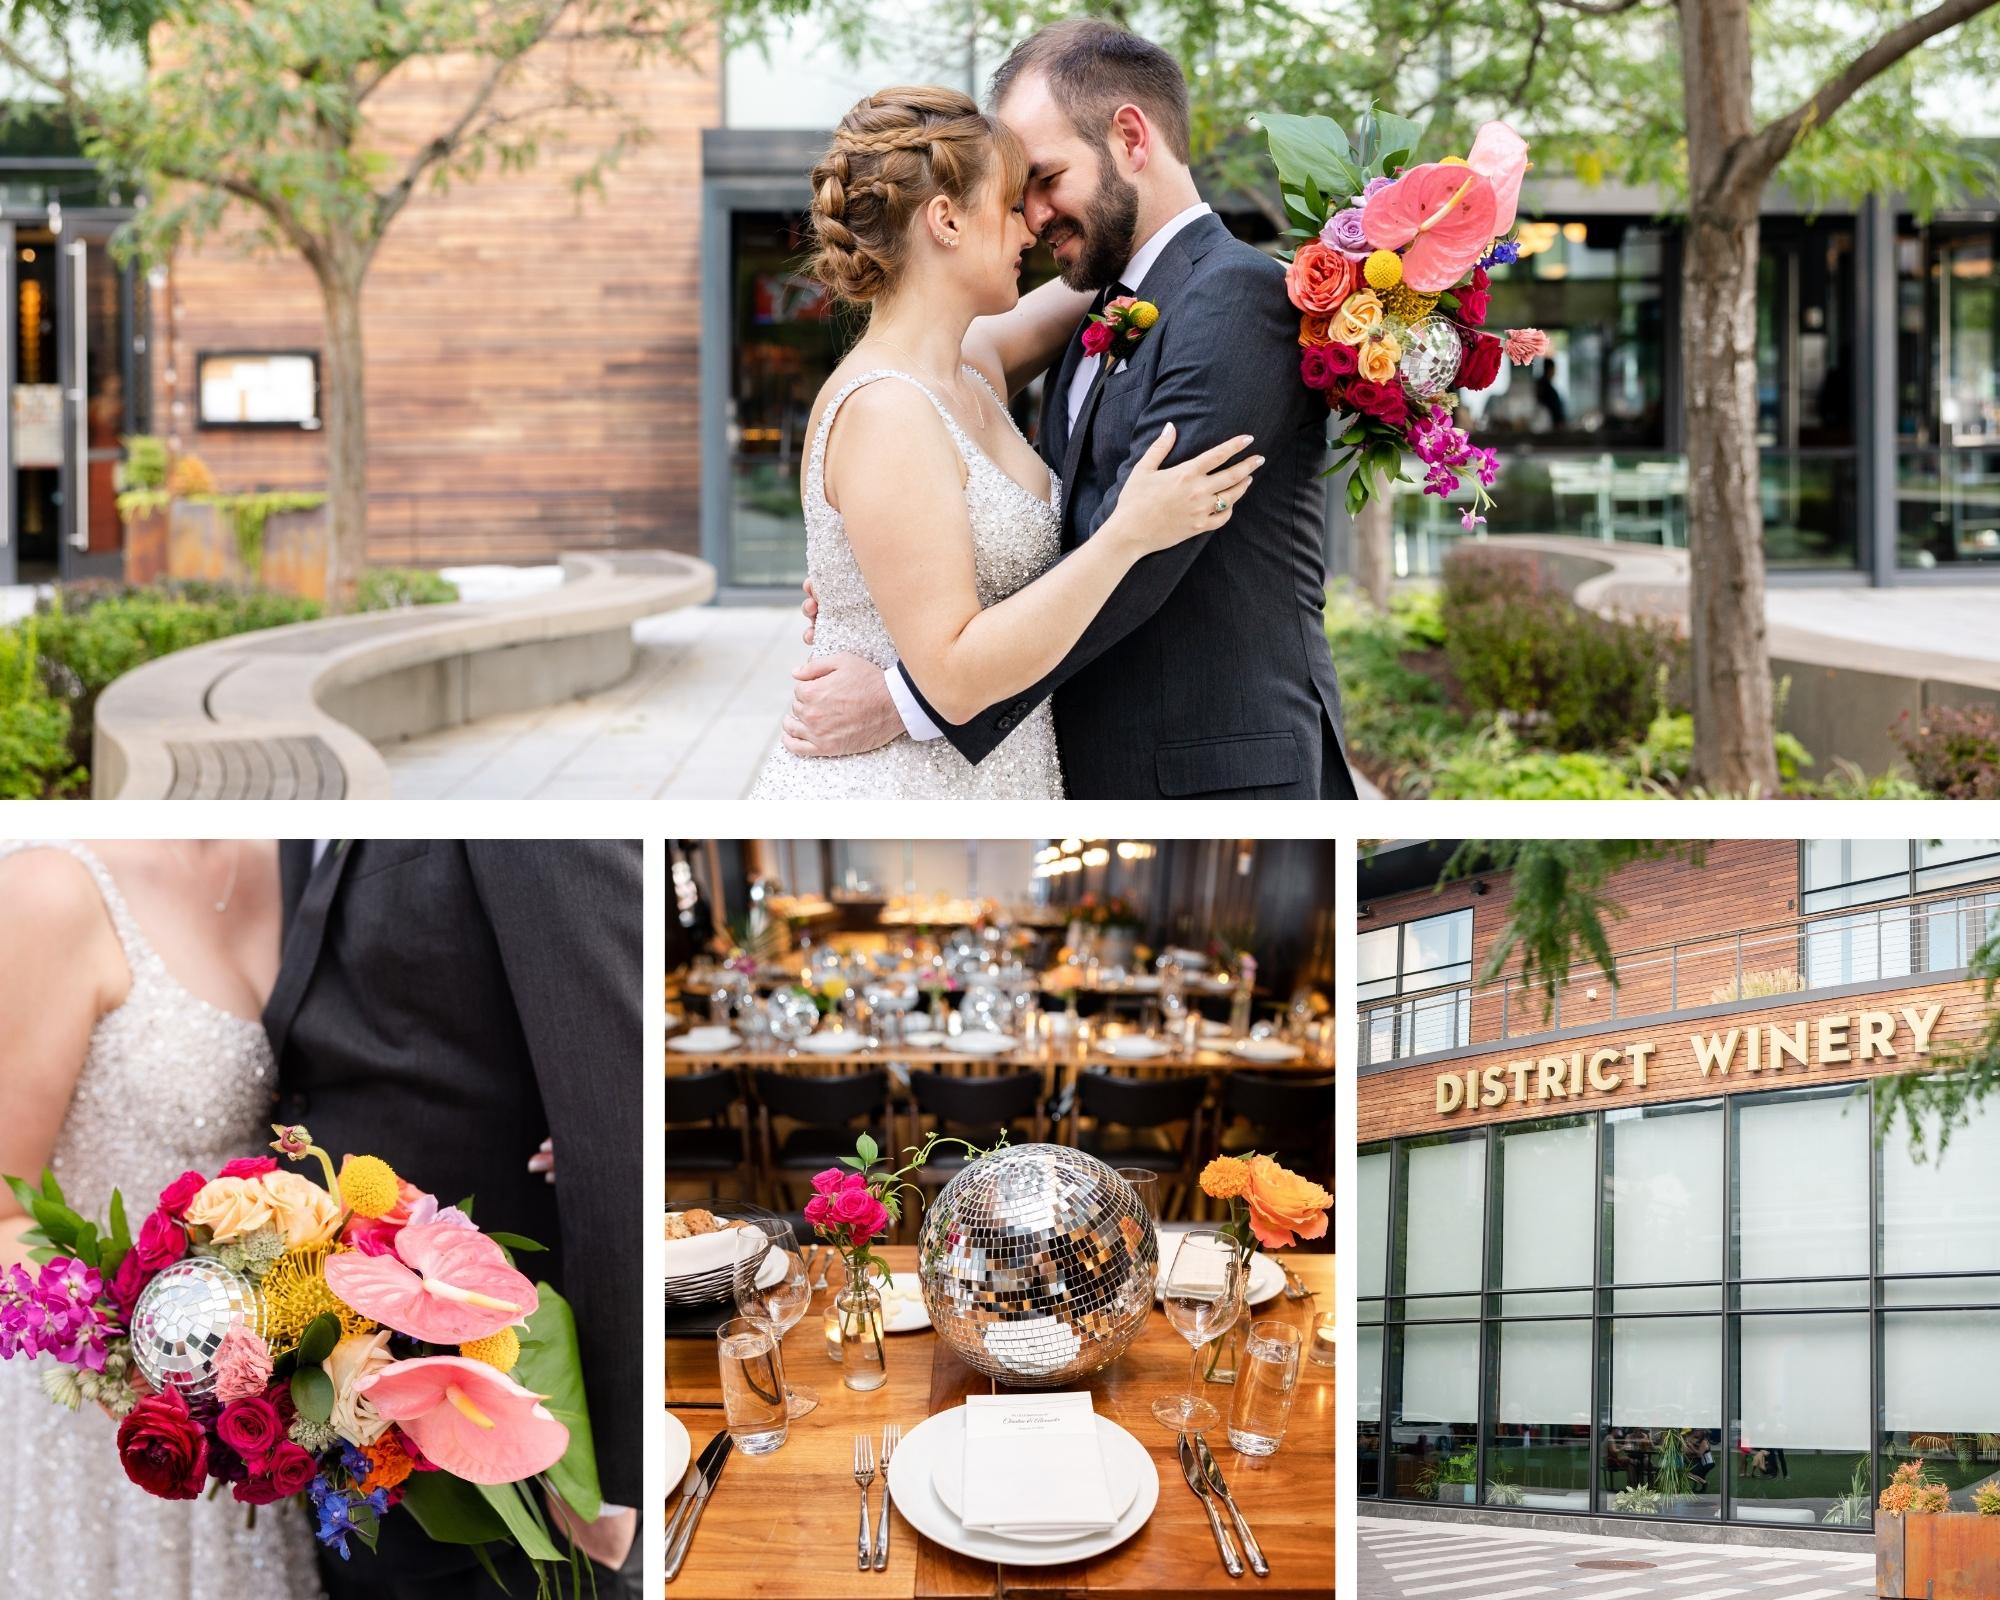 Collection of Photographs from a Luxury Wedding at District Winery in Washington DC - DMV